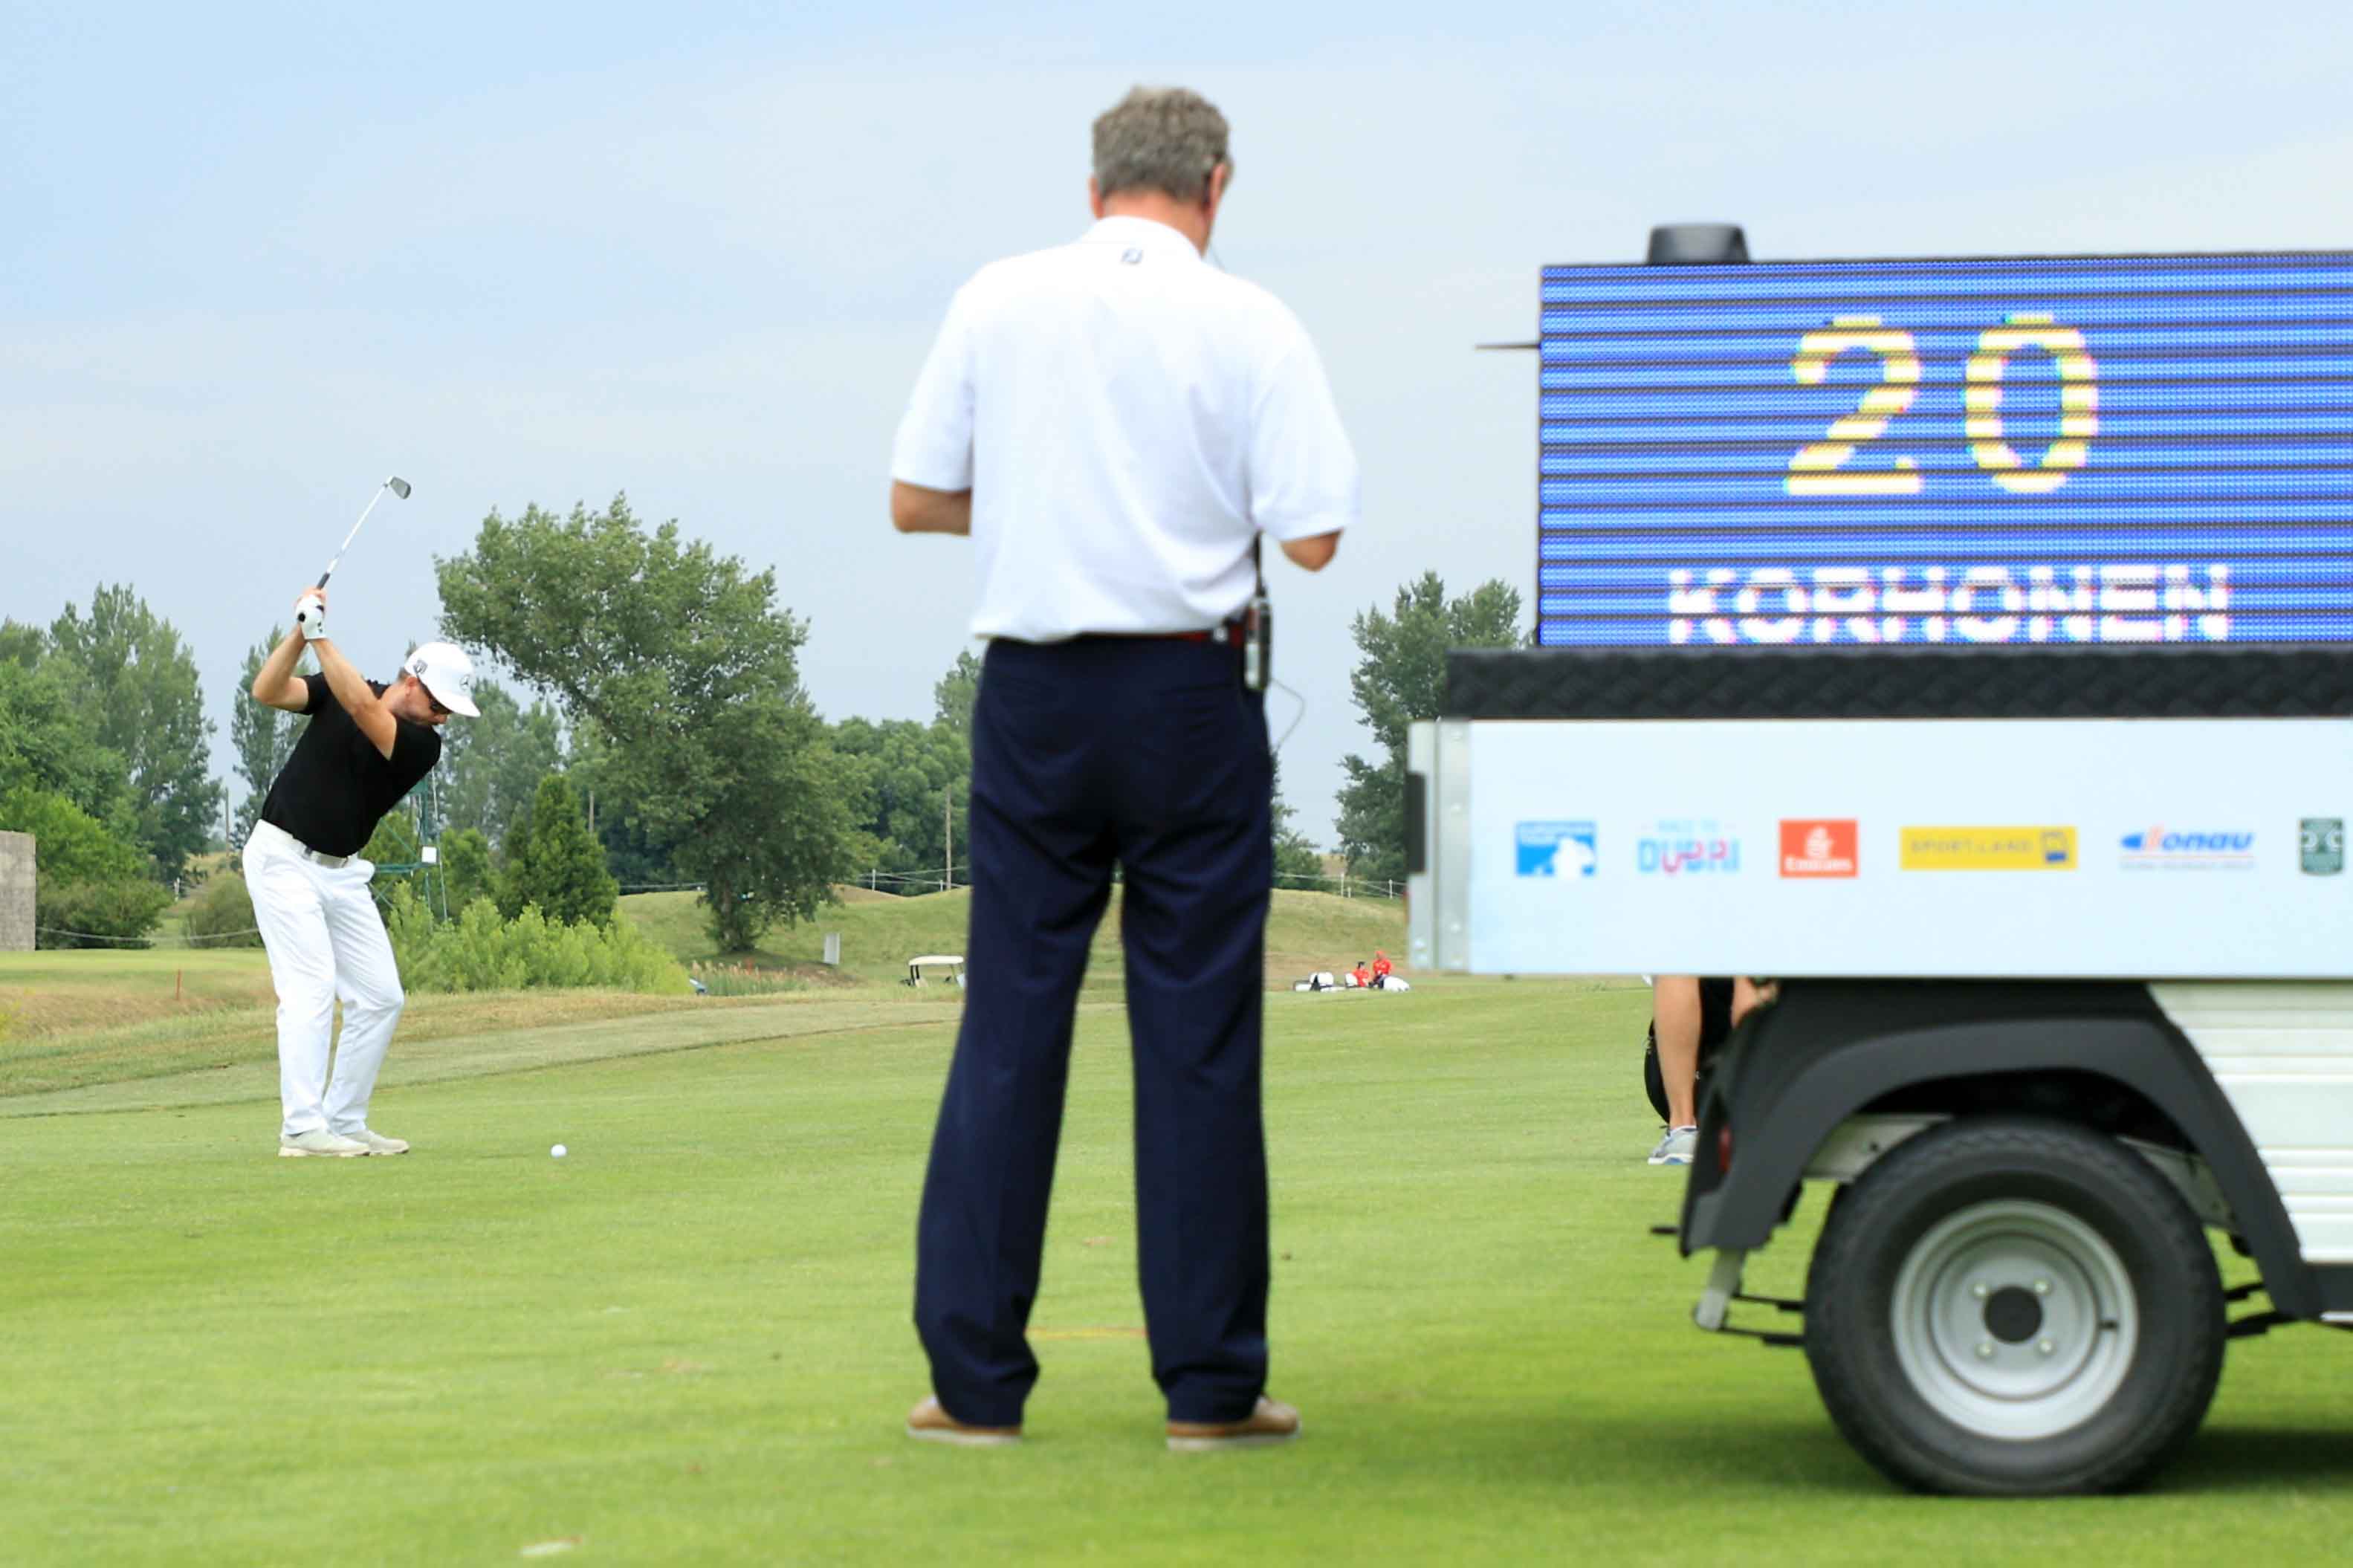 No practice swings and twoball tee times: European Tour chief's 'crazy' ideas to solve slow play